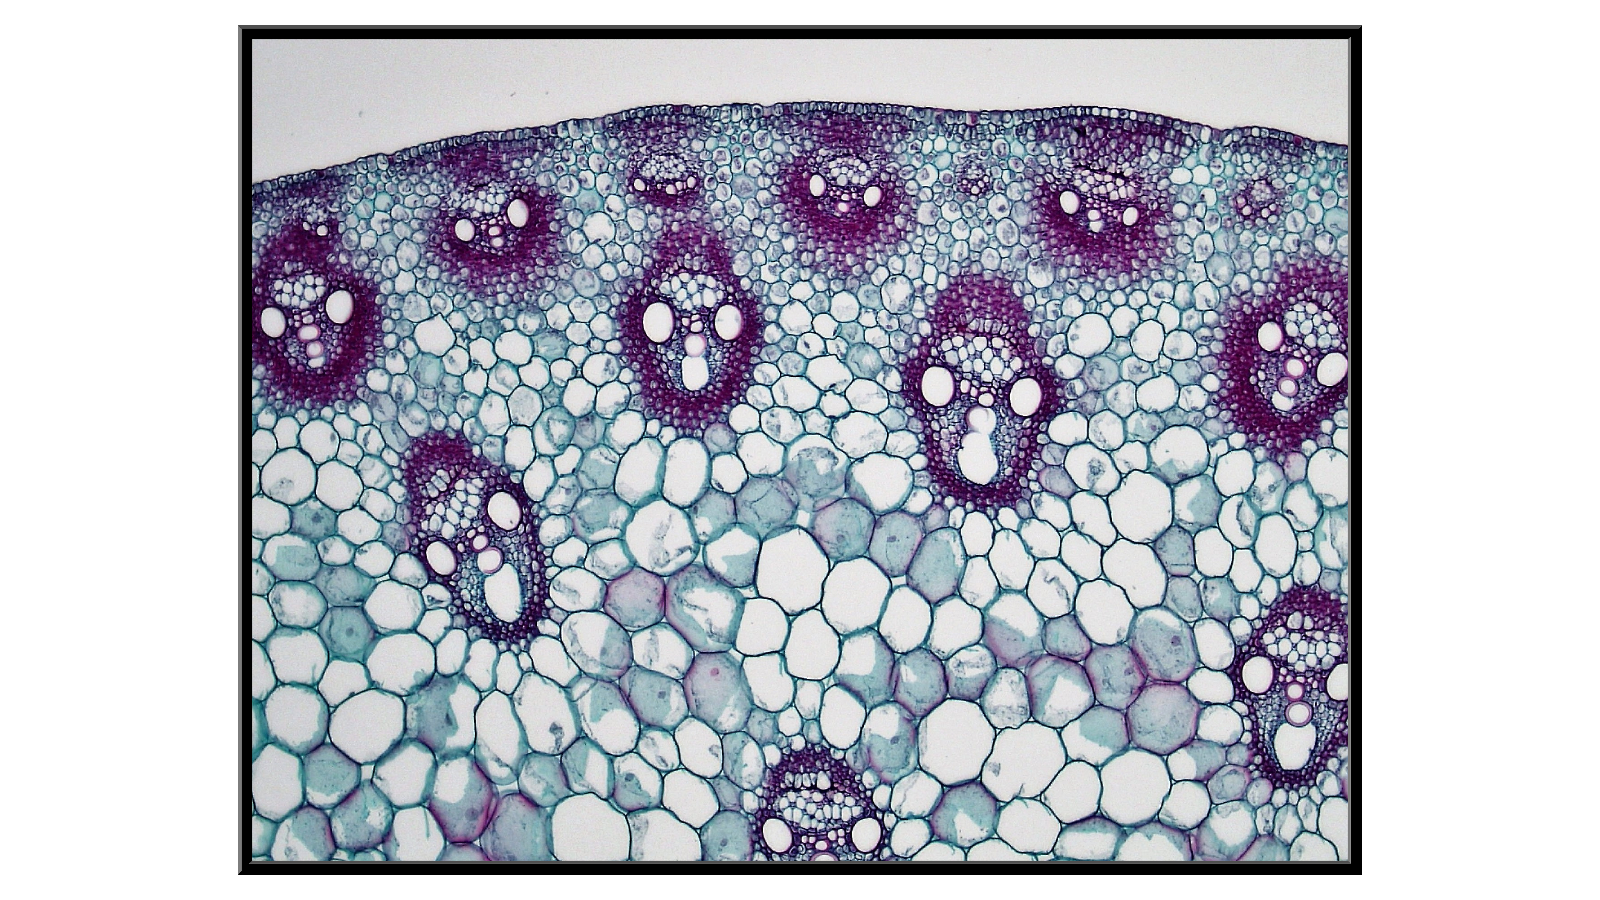 Cross-section of a corn stalk - 2